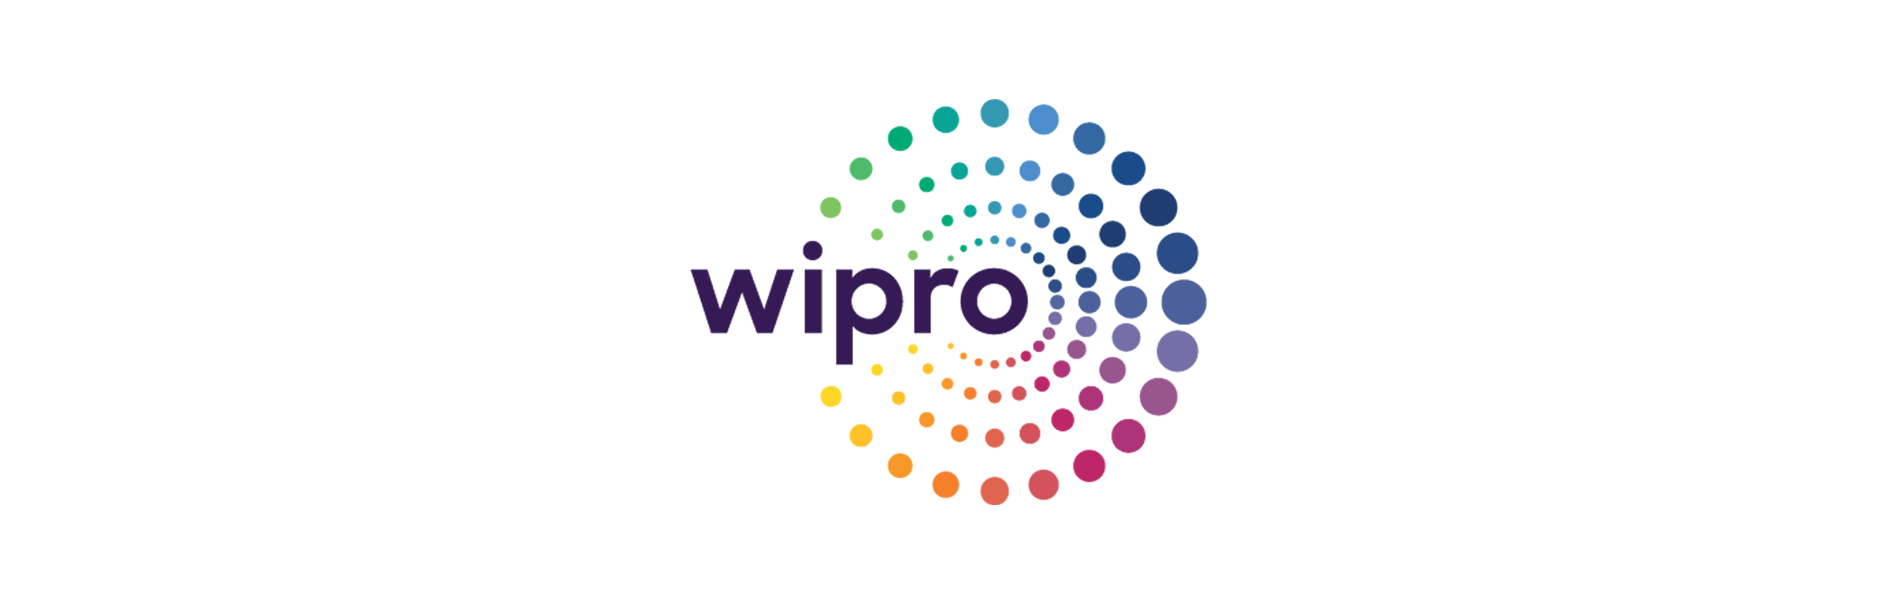 Machine learning In Mining Industry - Wipro